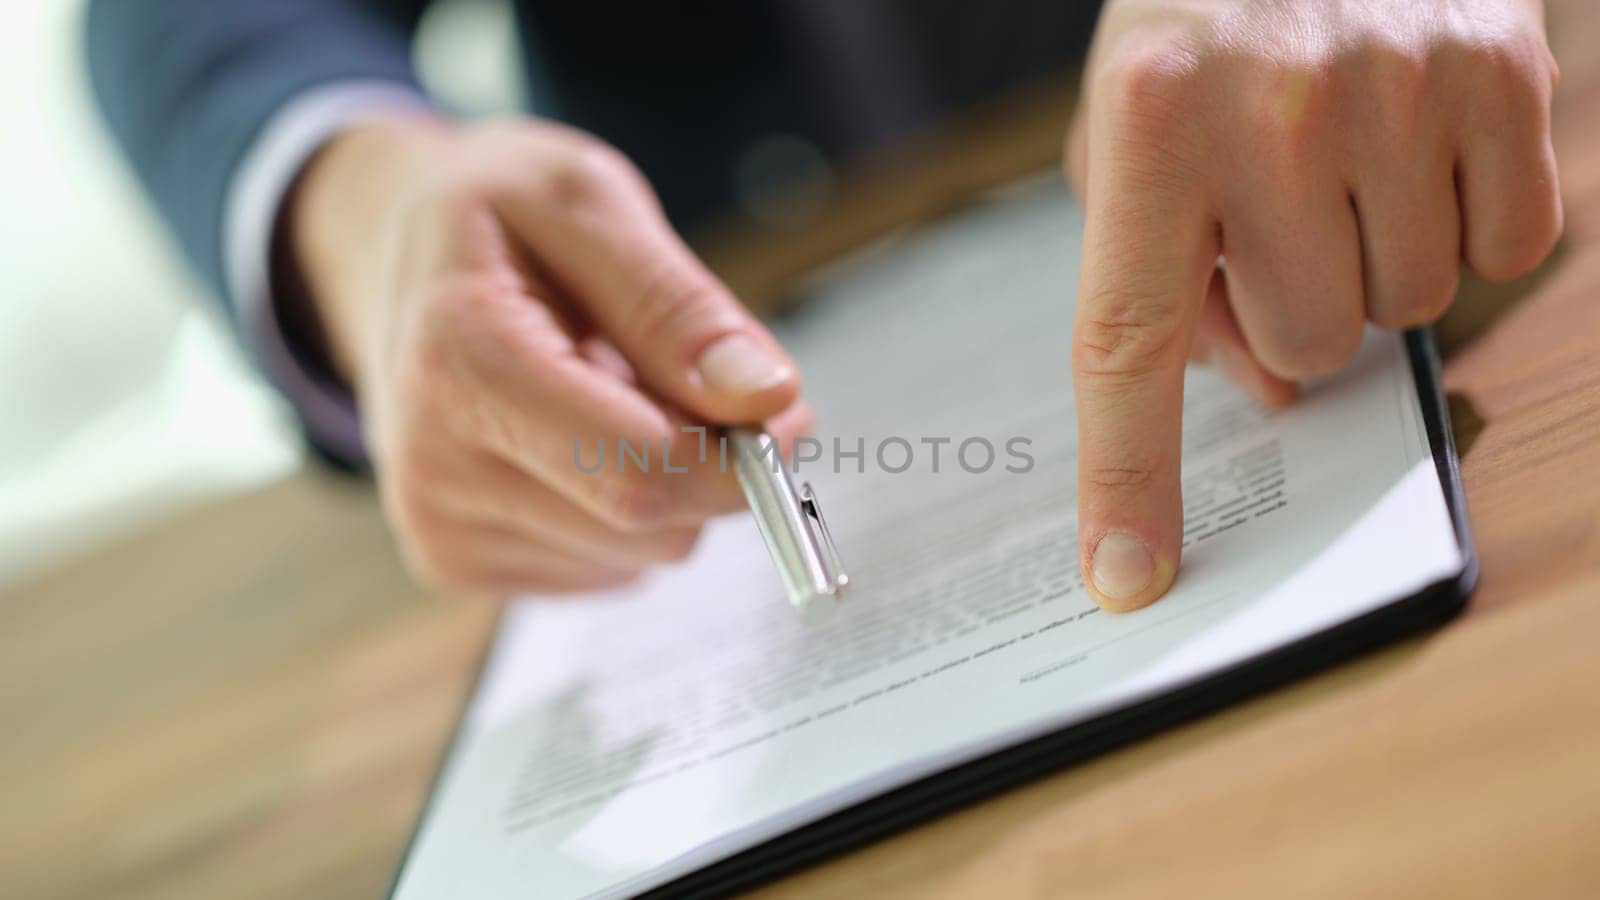 Manager showing client place to sign in document and holding out pen closeup. Legal work with clients and sale of real estate concept